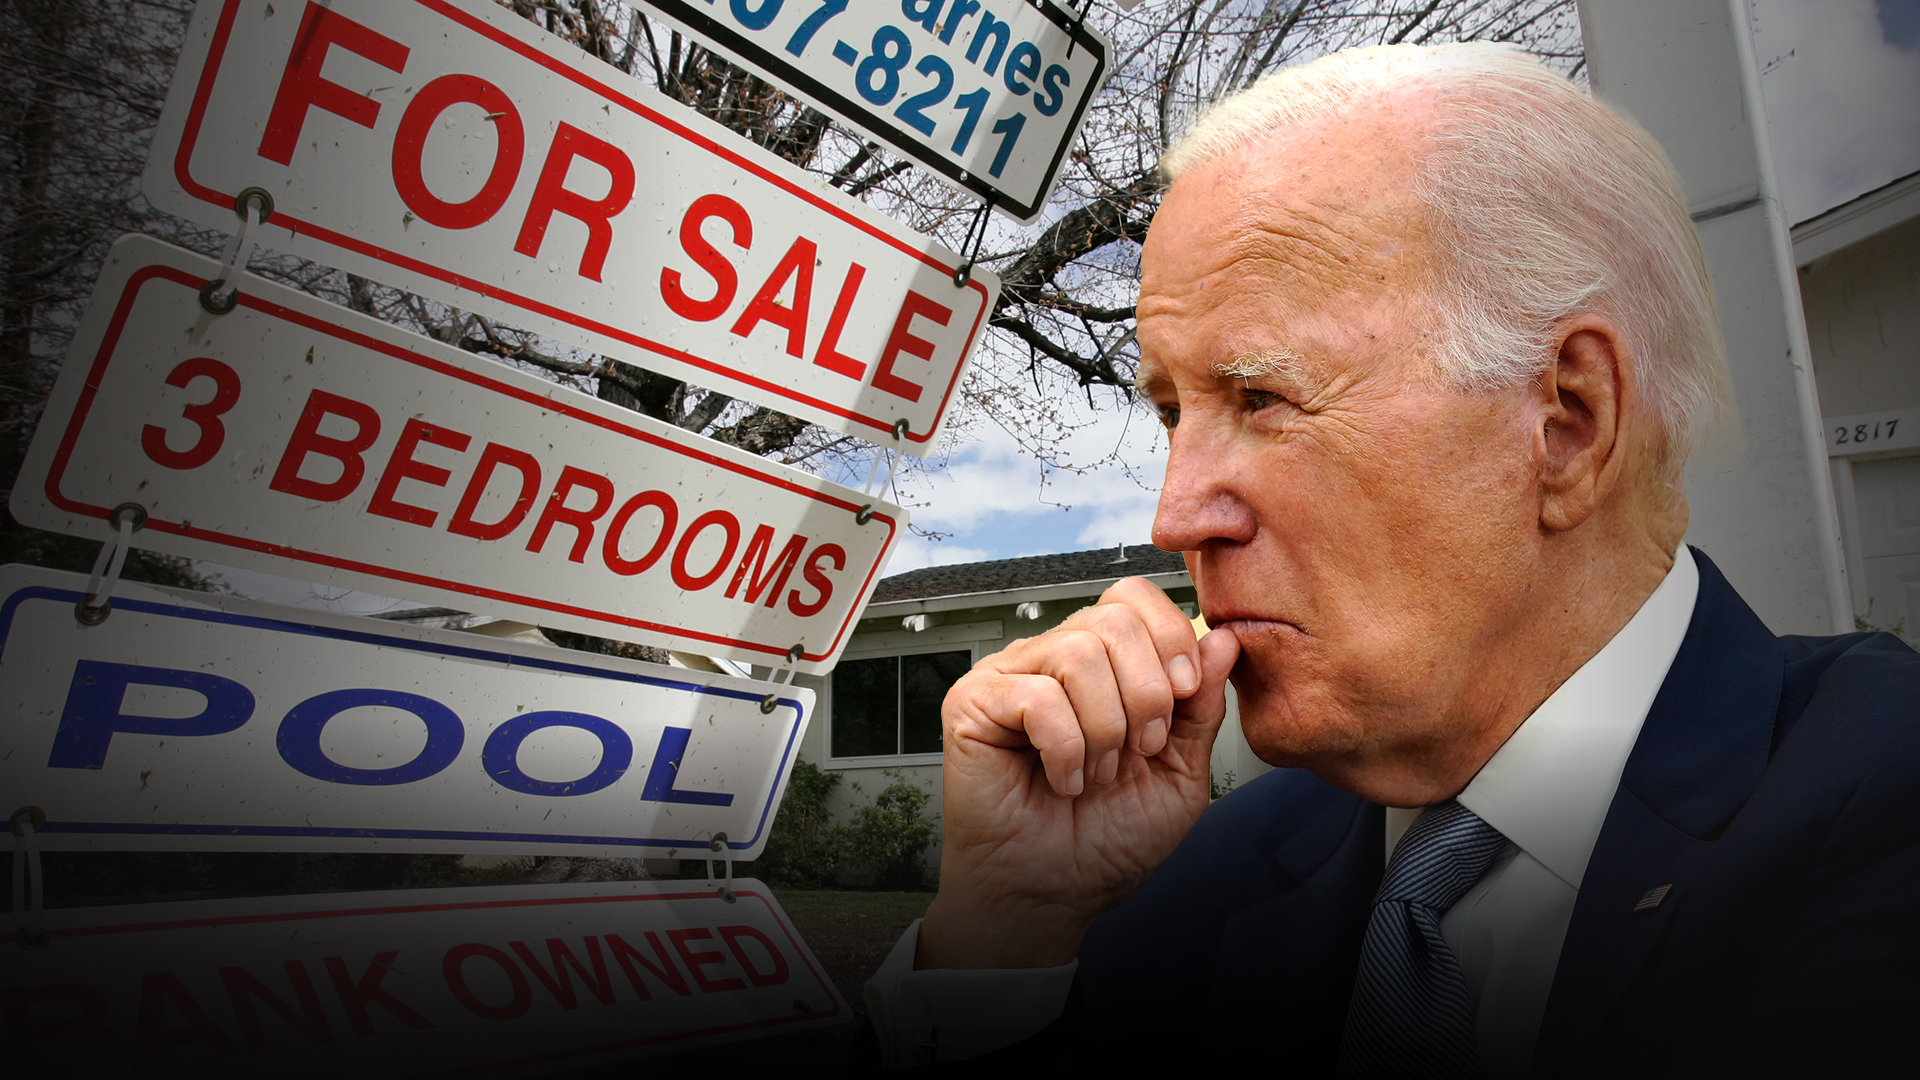 Could soaring housing prices affect Biden’s re-election bid? | Business and Economy